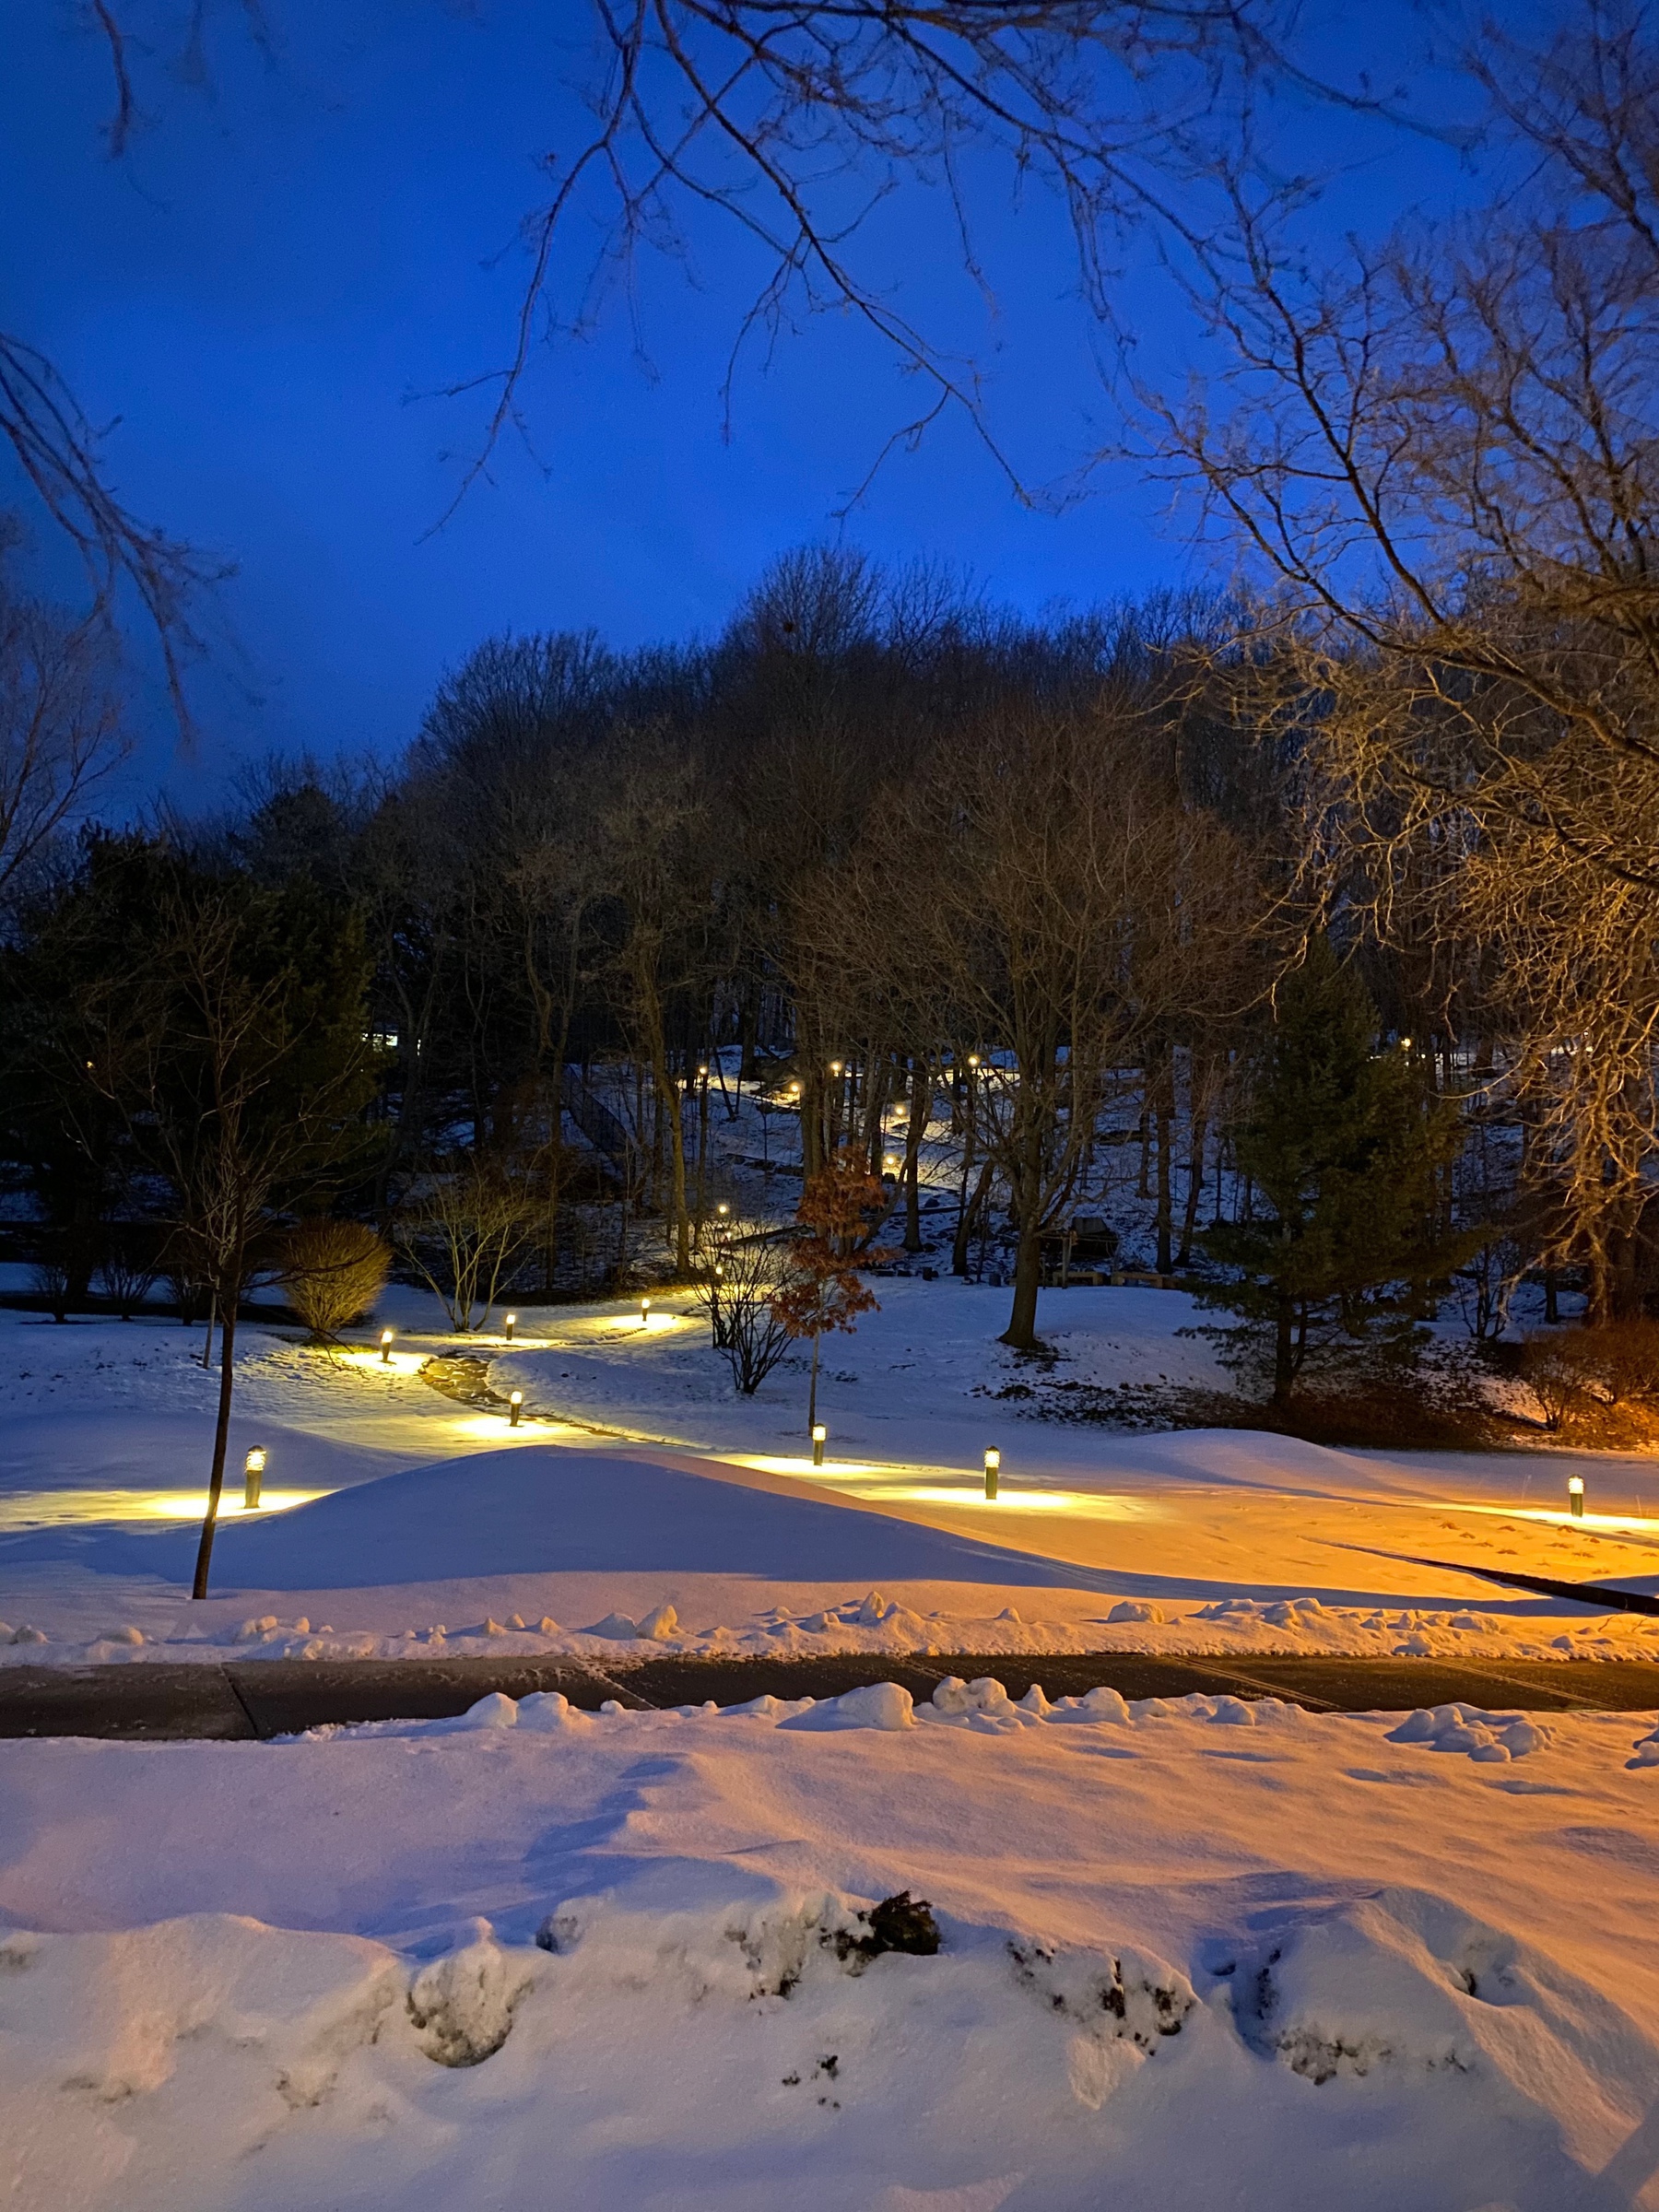 Twilight view of a hill covered in dark trees with lights illuminating the snow on the slope below.